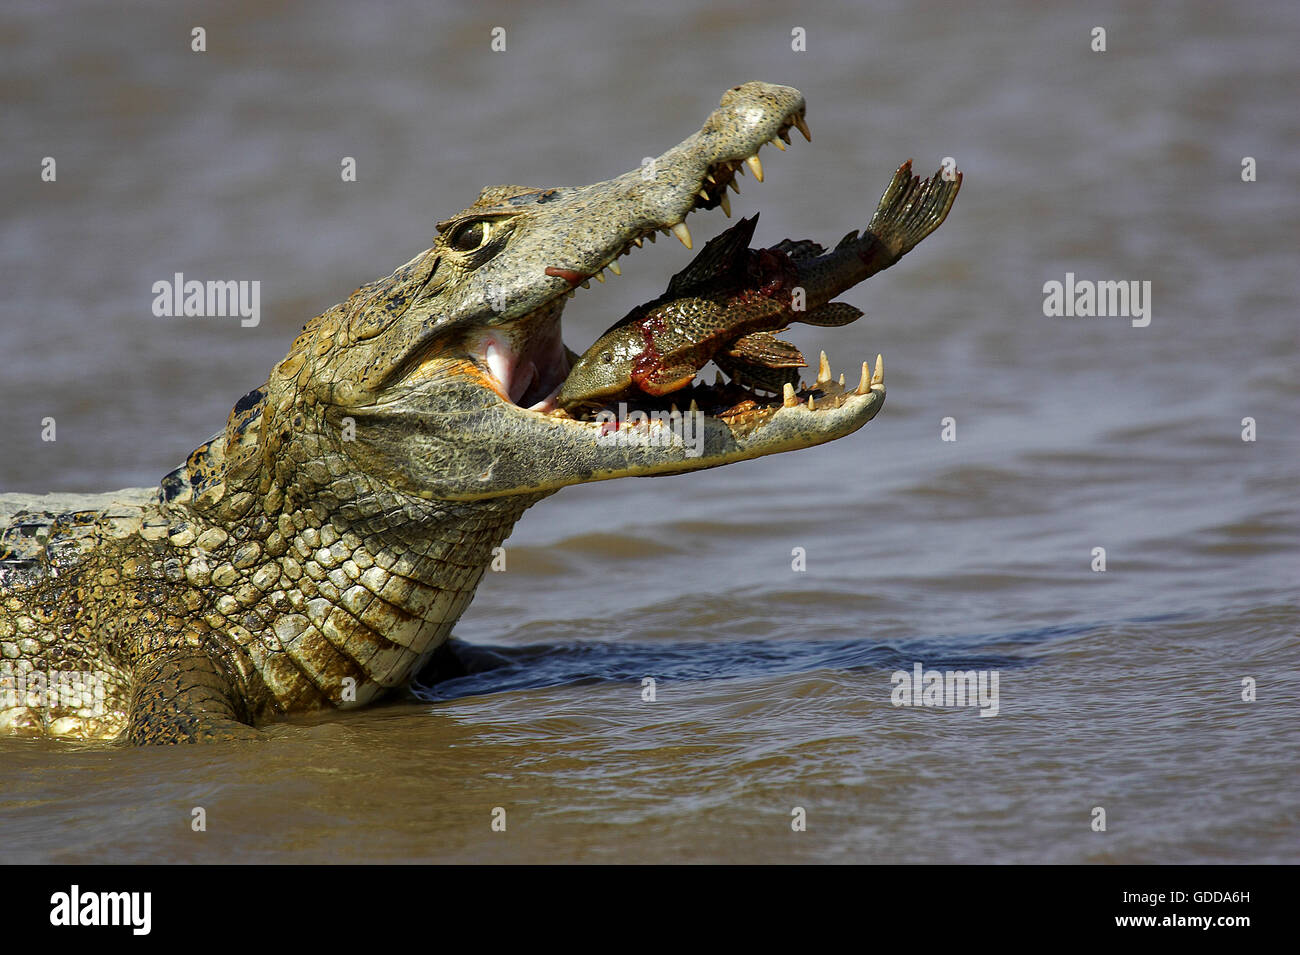 SPECTACLED CAIMAN caiman crocodilus, ADULT CATCHING FISH, LOS LIANOS IN VENEZUELA Stock Photo